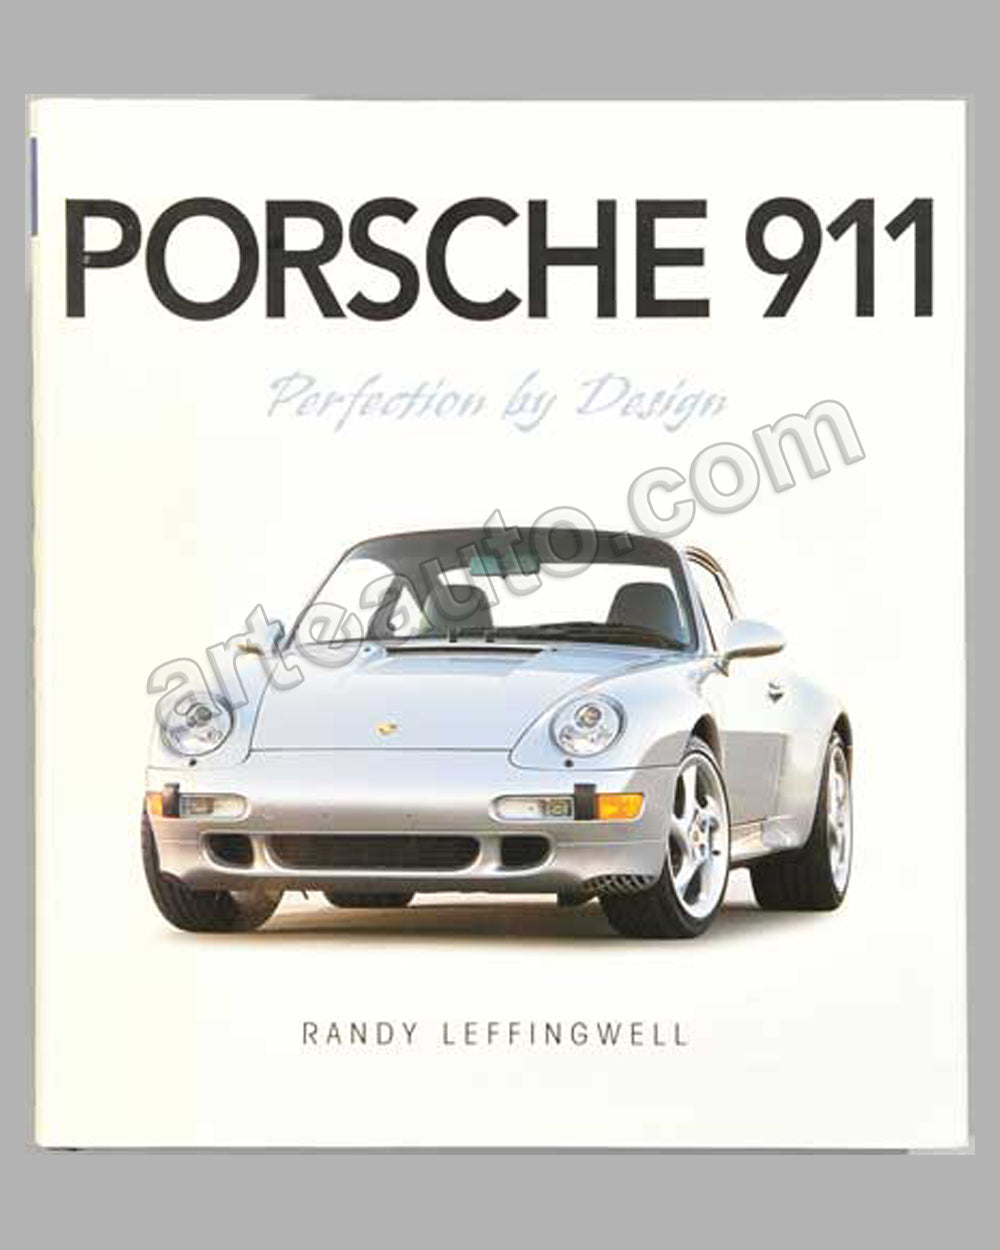 Porsche - Perfection by Design book by R. Leffingwell, 2005